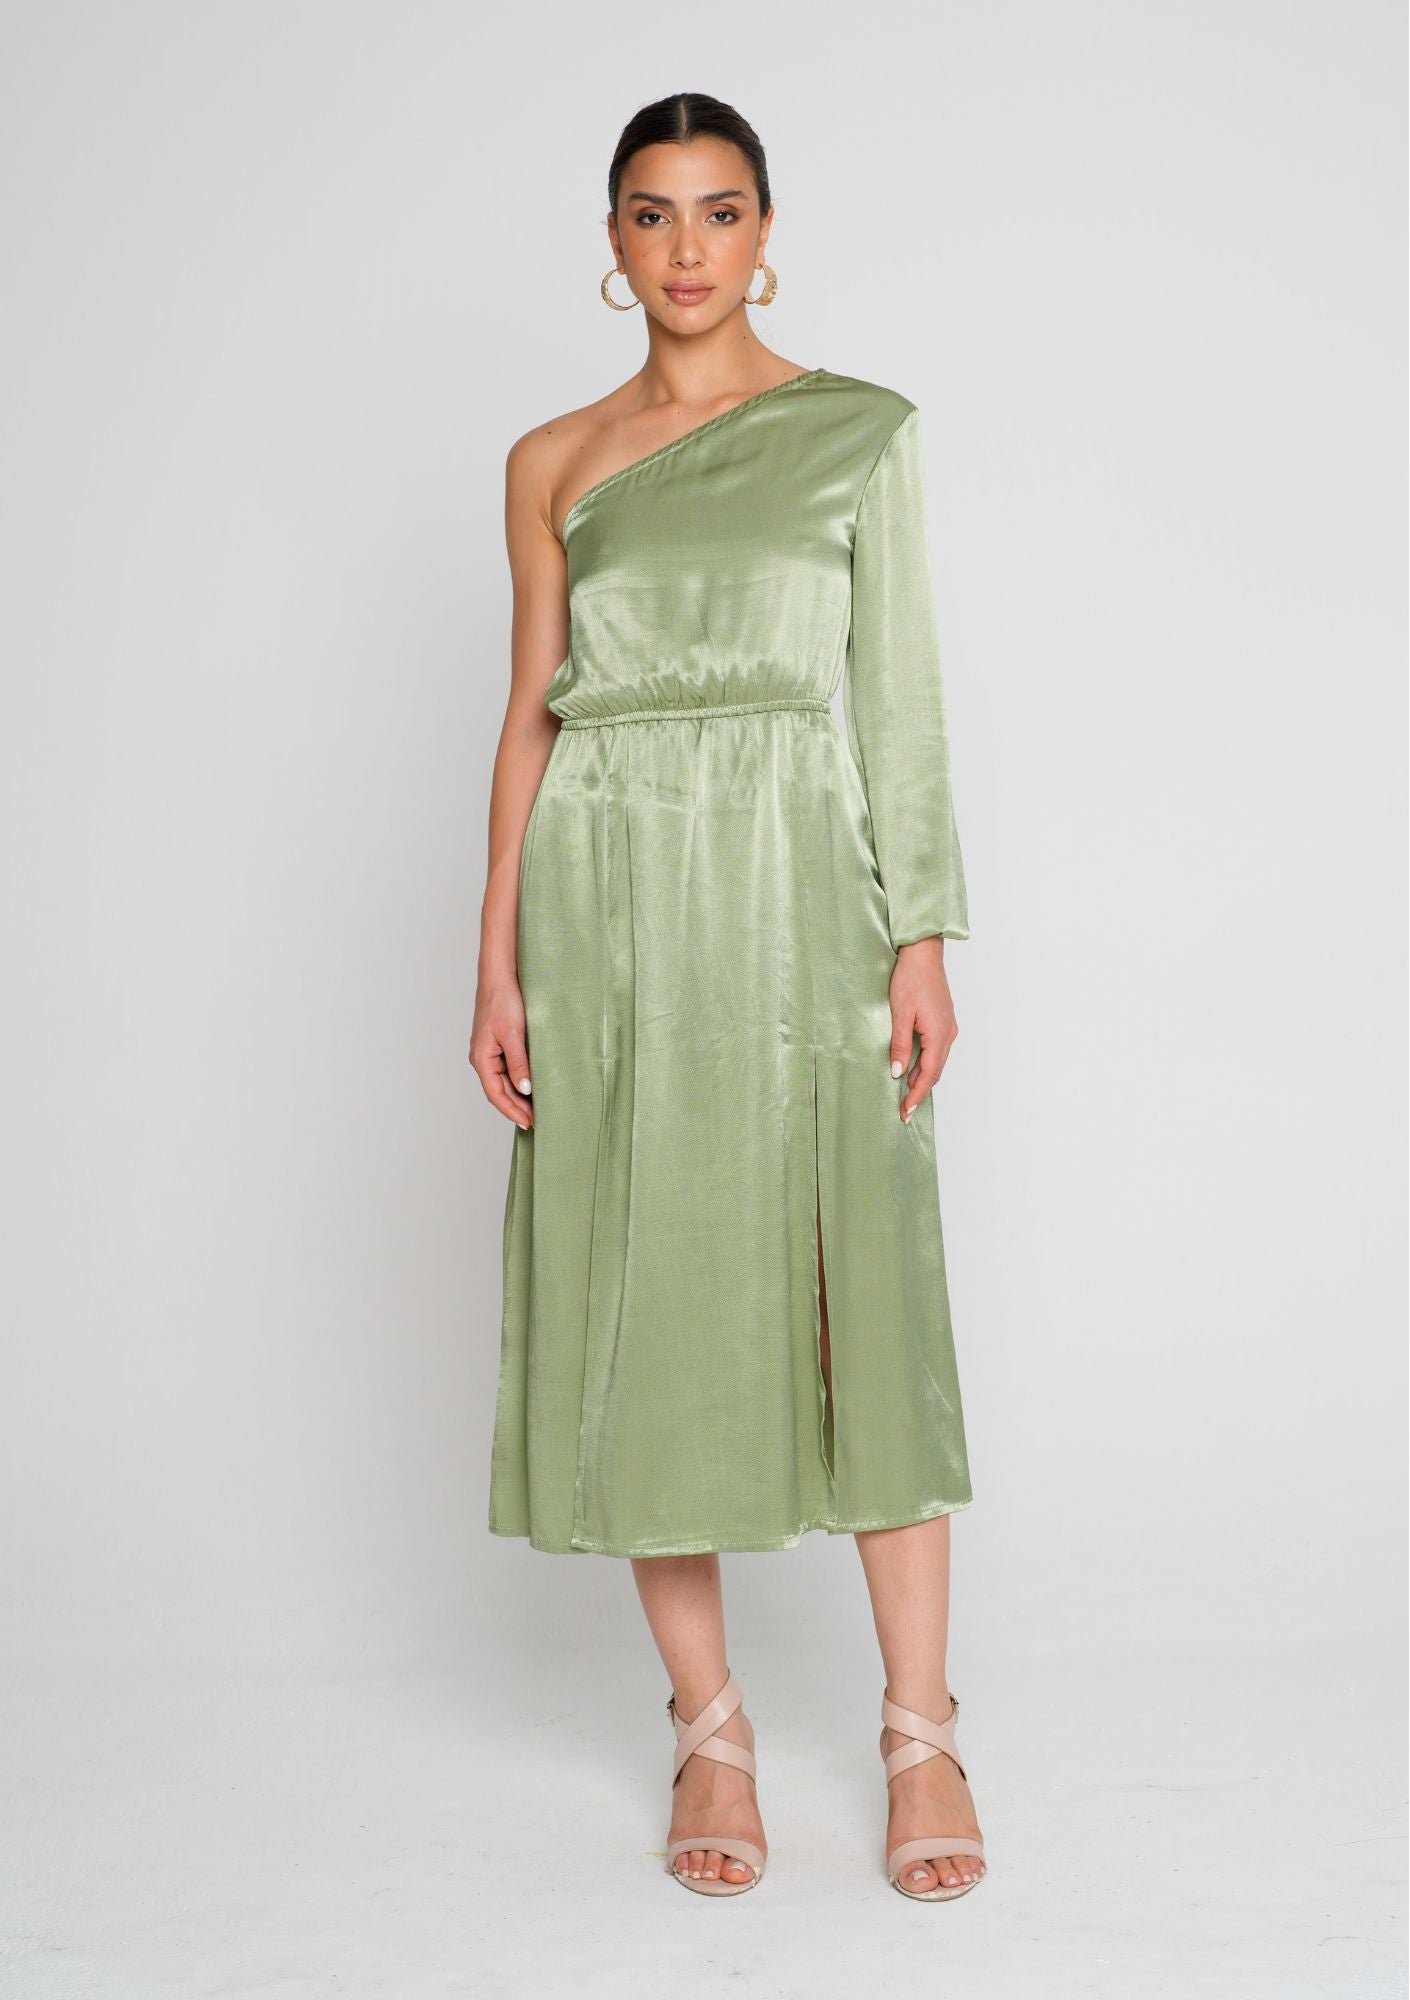 Unscripted women's fashion all in one Sage green one shoulder